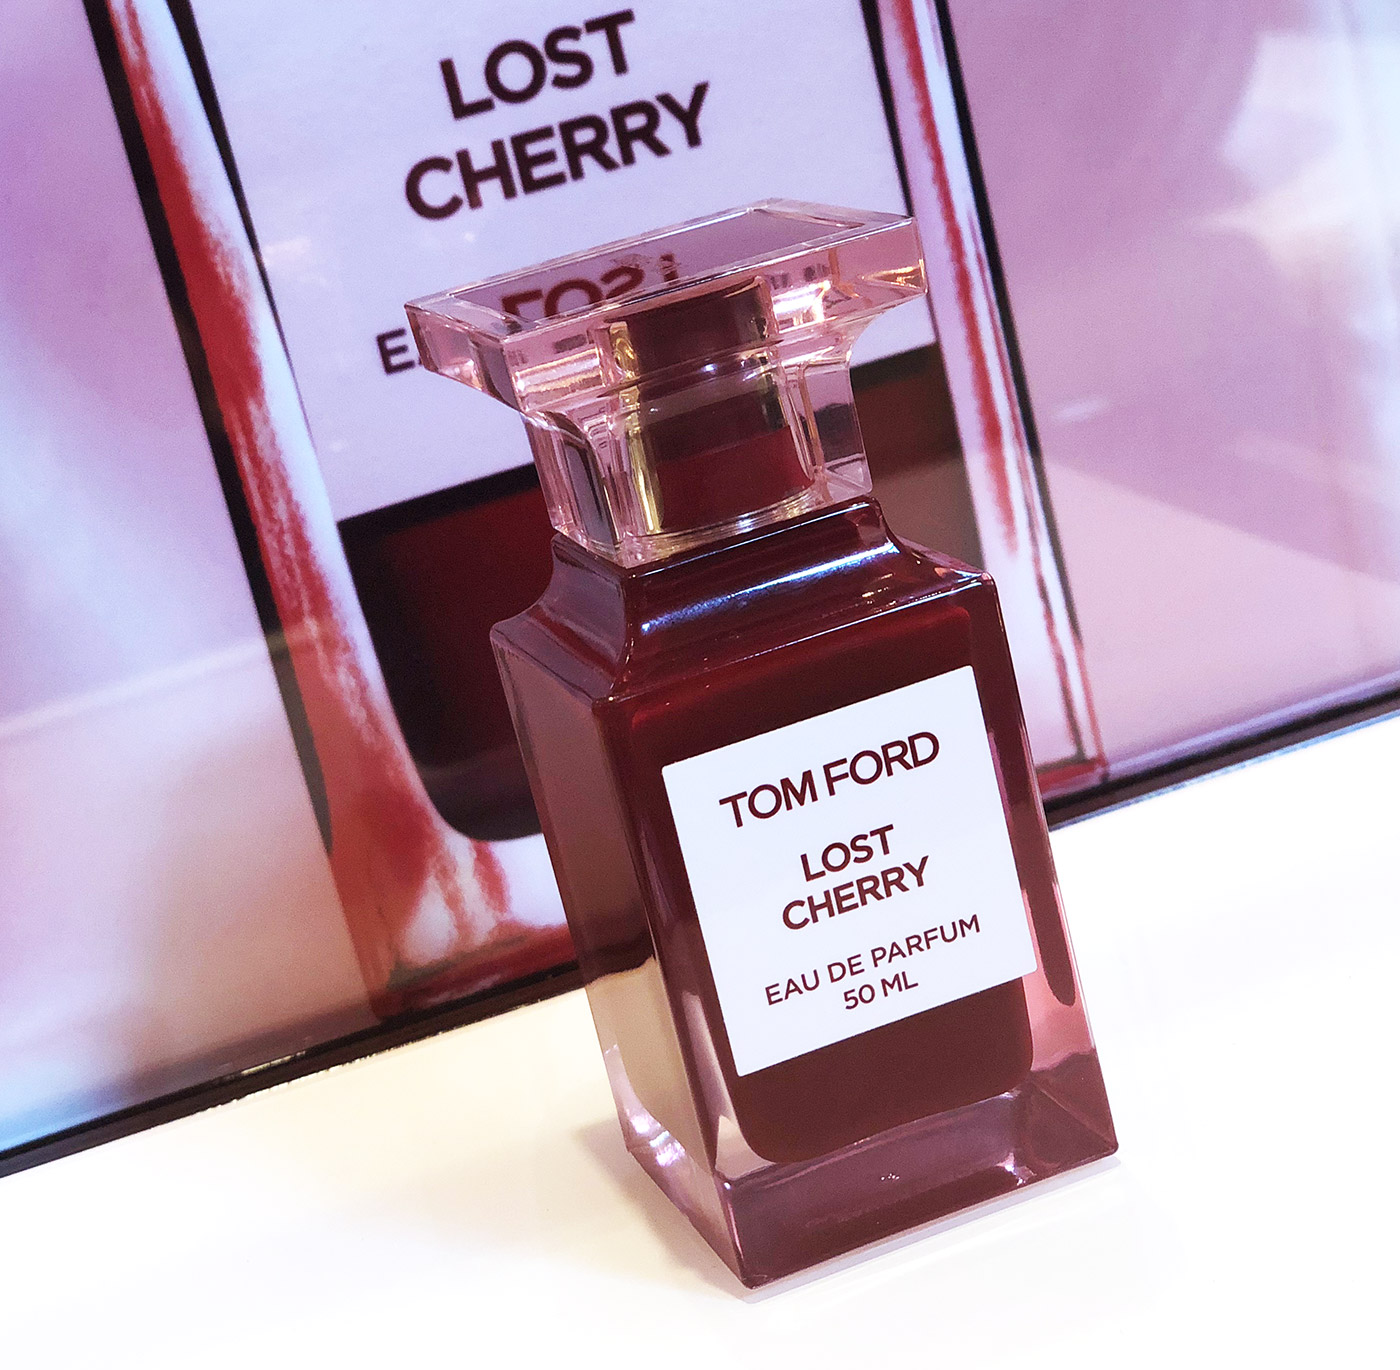 News From Tom Ford: Lost Cherry ~ Fragrance Reviews